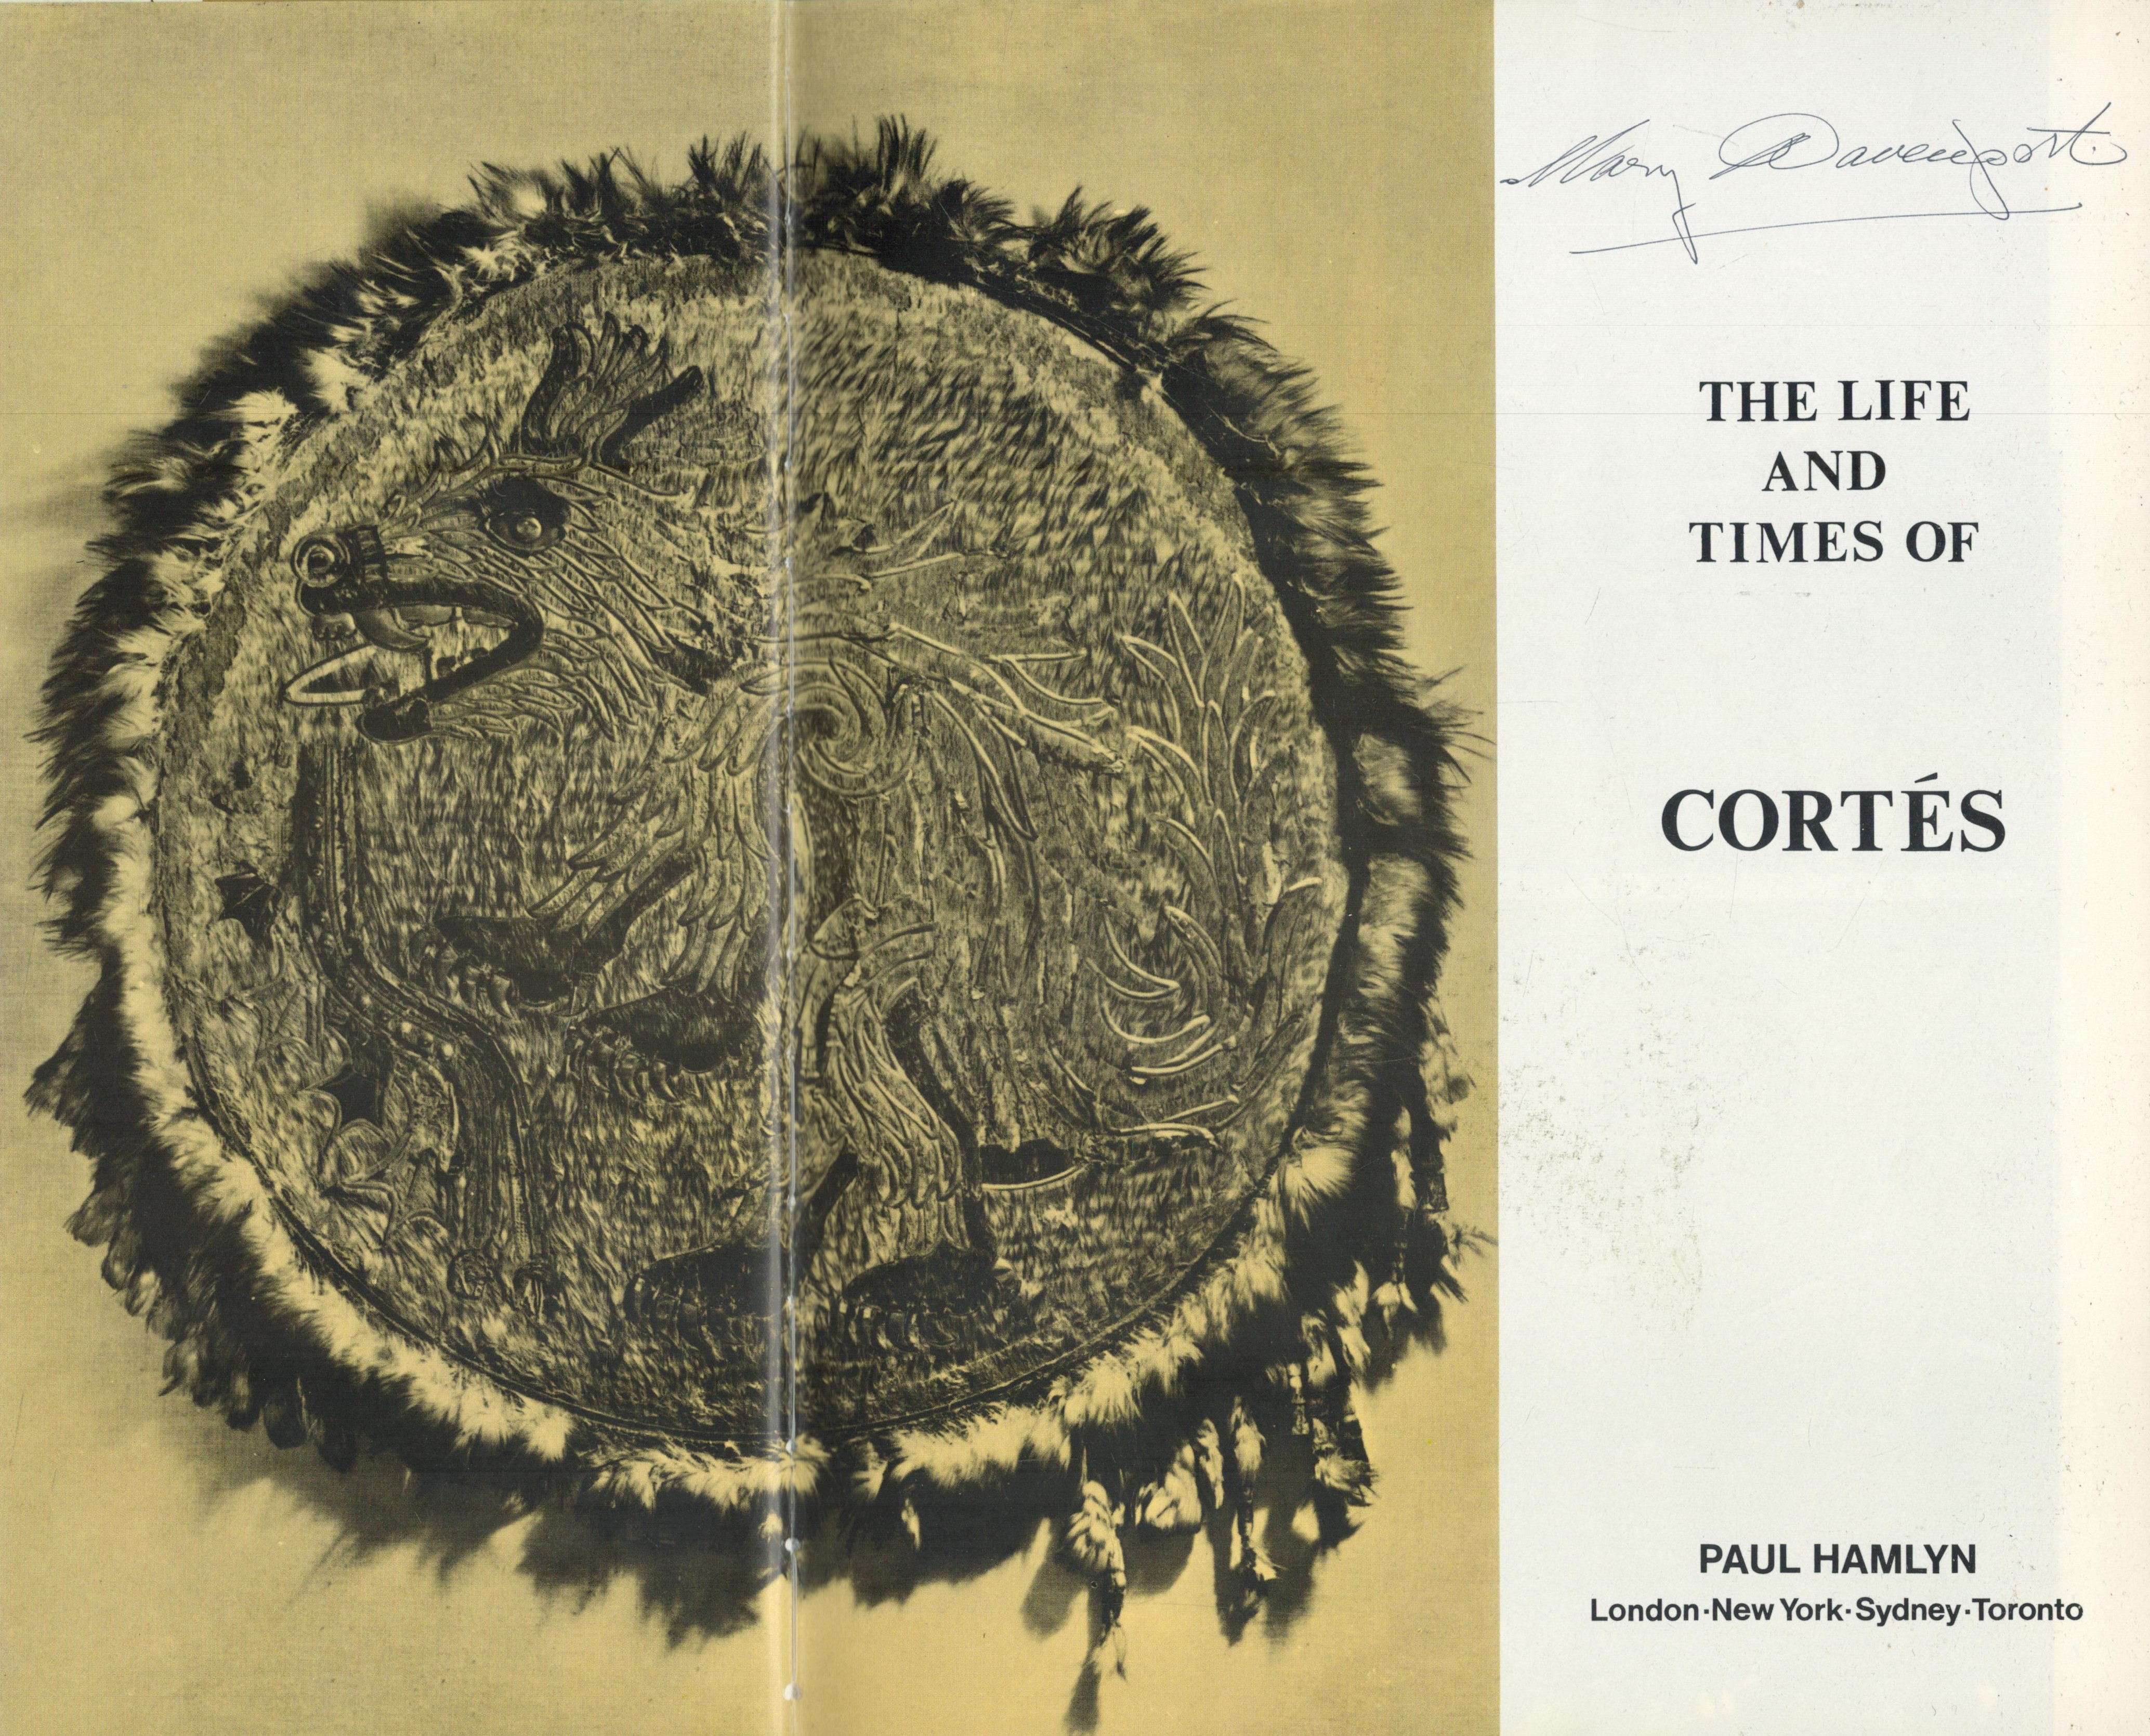 The Life and Times of Cortes 1969 hardback book with 75 pages, signs of ageing, fair to good - Image 2 of 3